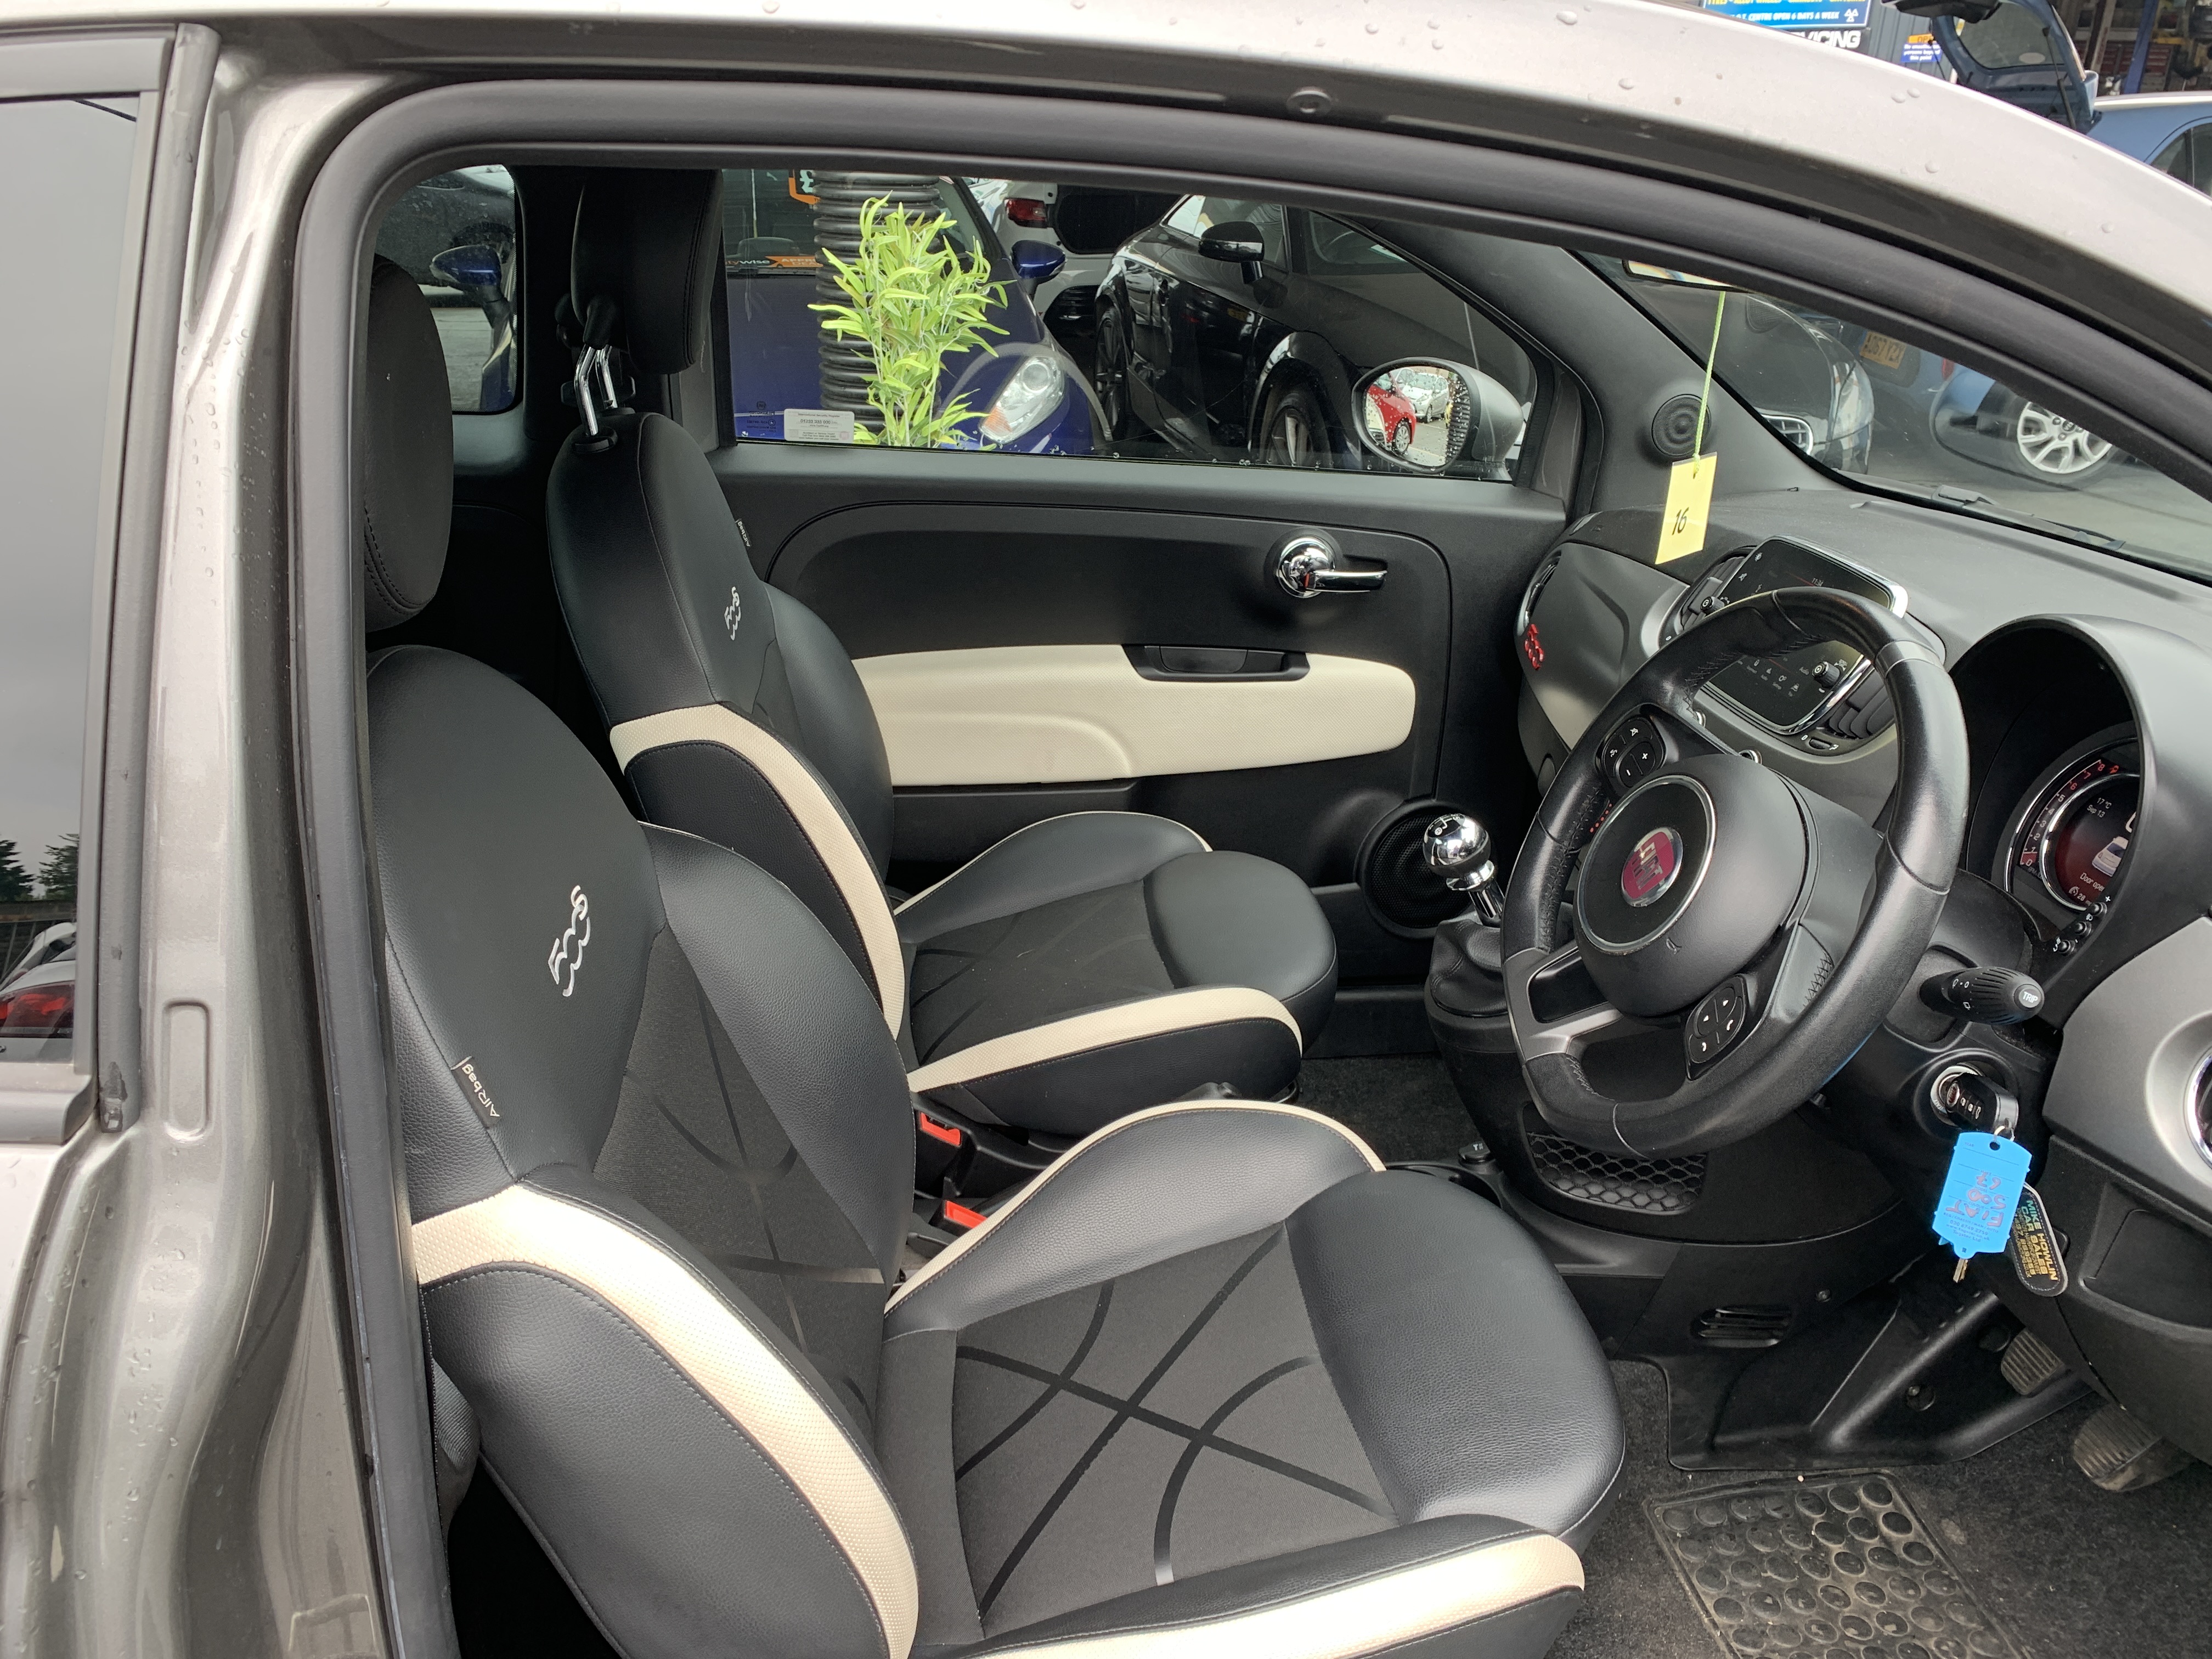 Fiat 500 s  for sale at Mike Howlin Motor Sales Pembrokeshire